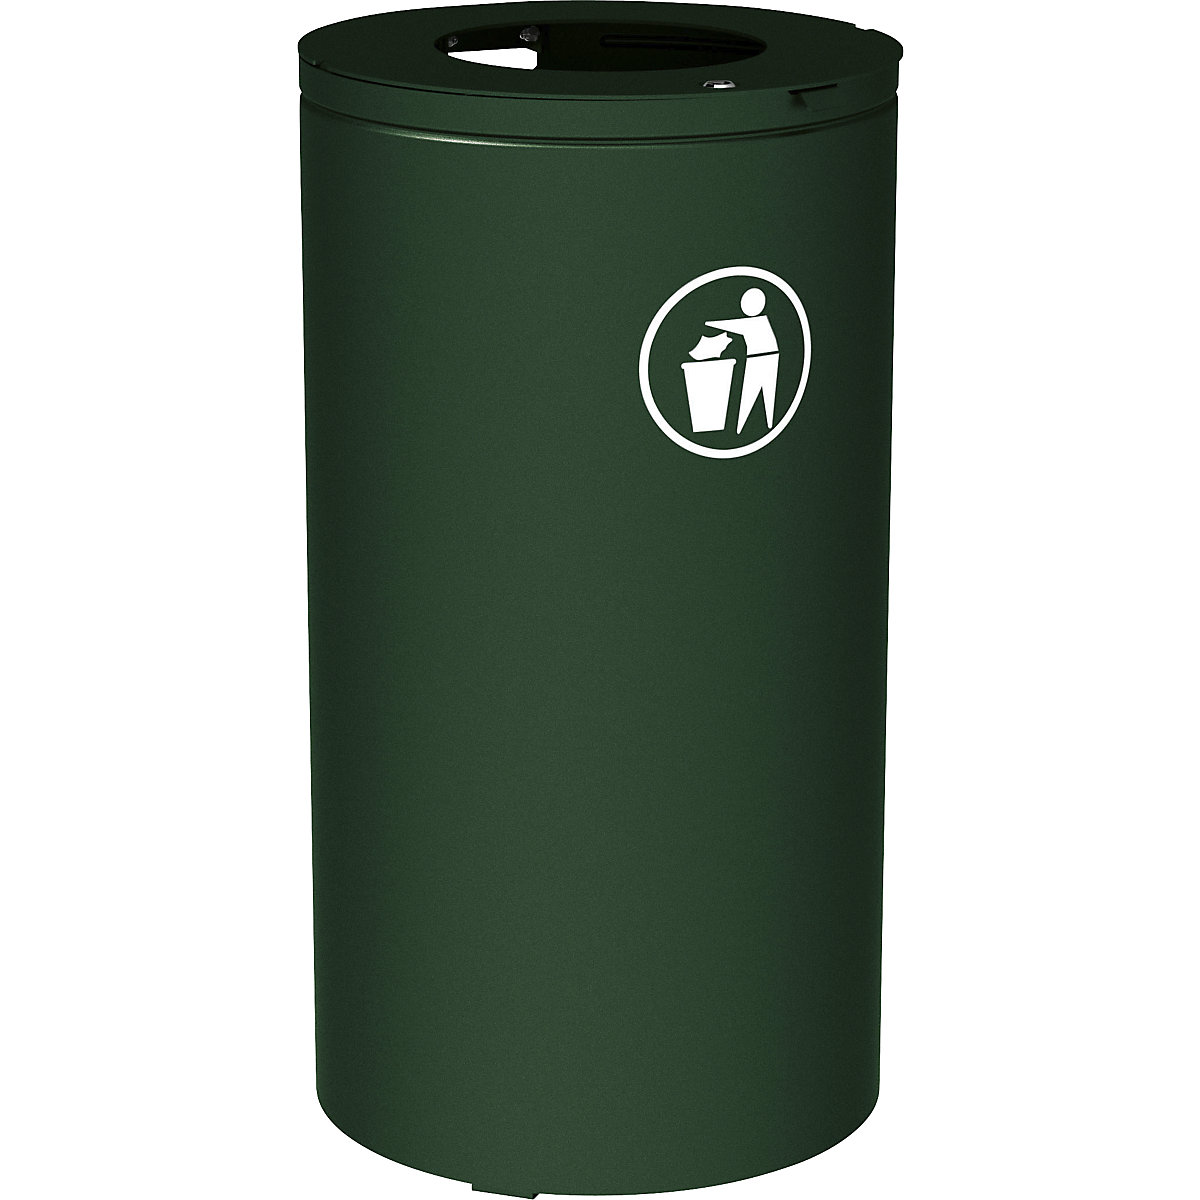 OLBIA outdoor waste collector – PROCITY